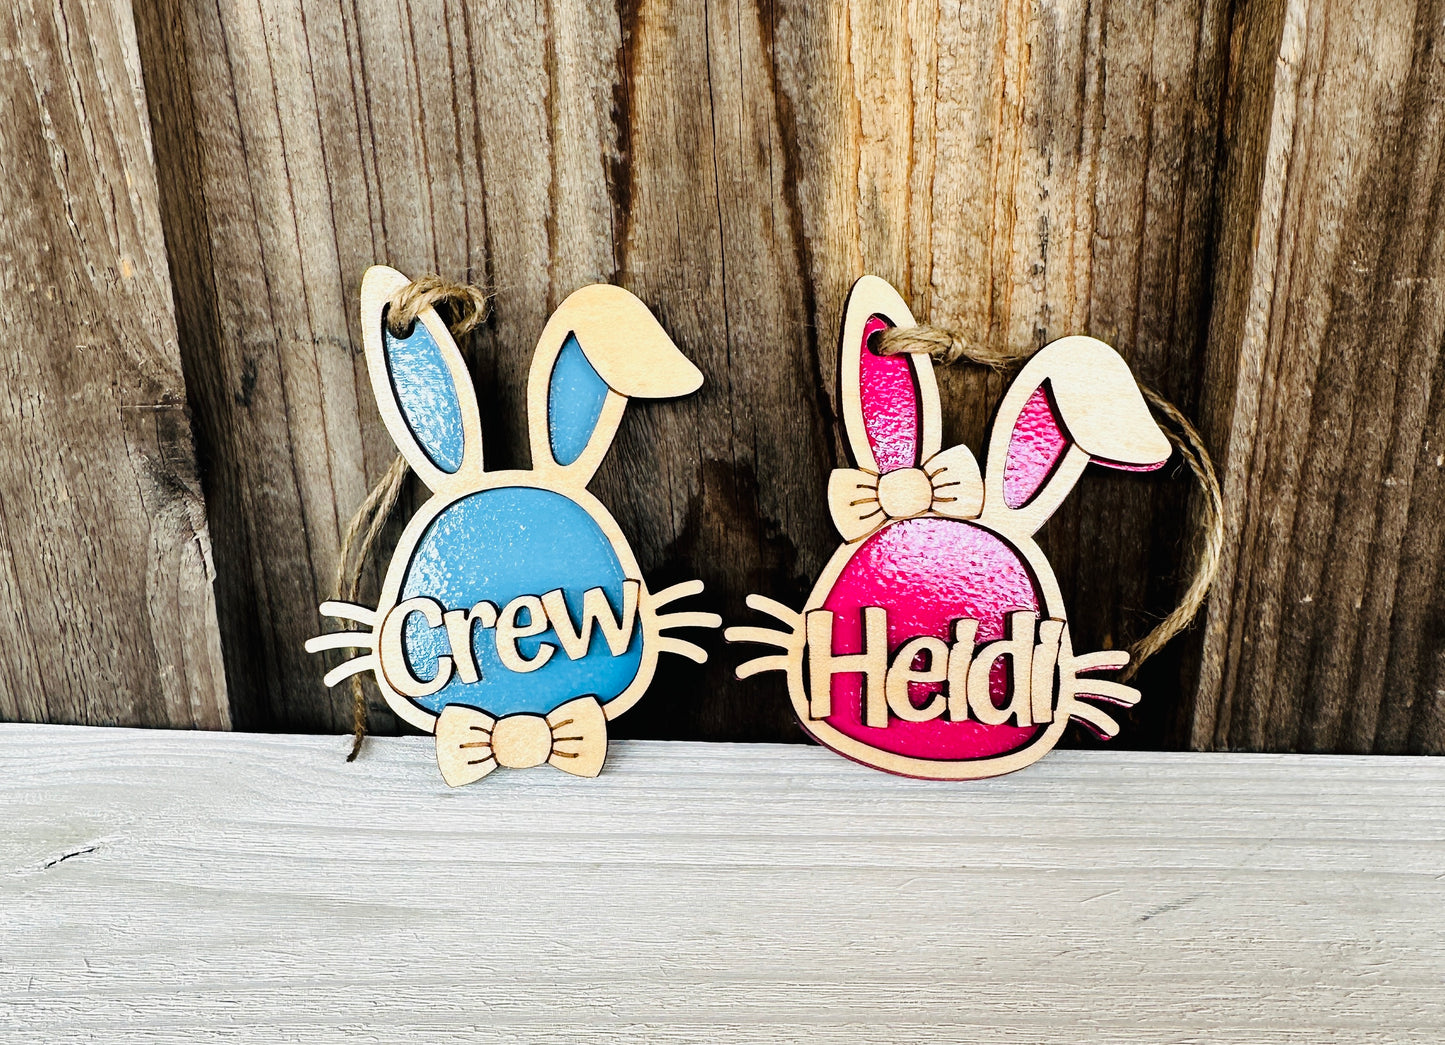 Easter Basket Personalized Name Tags